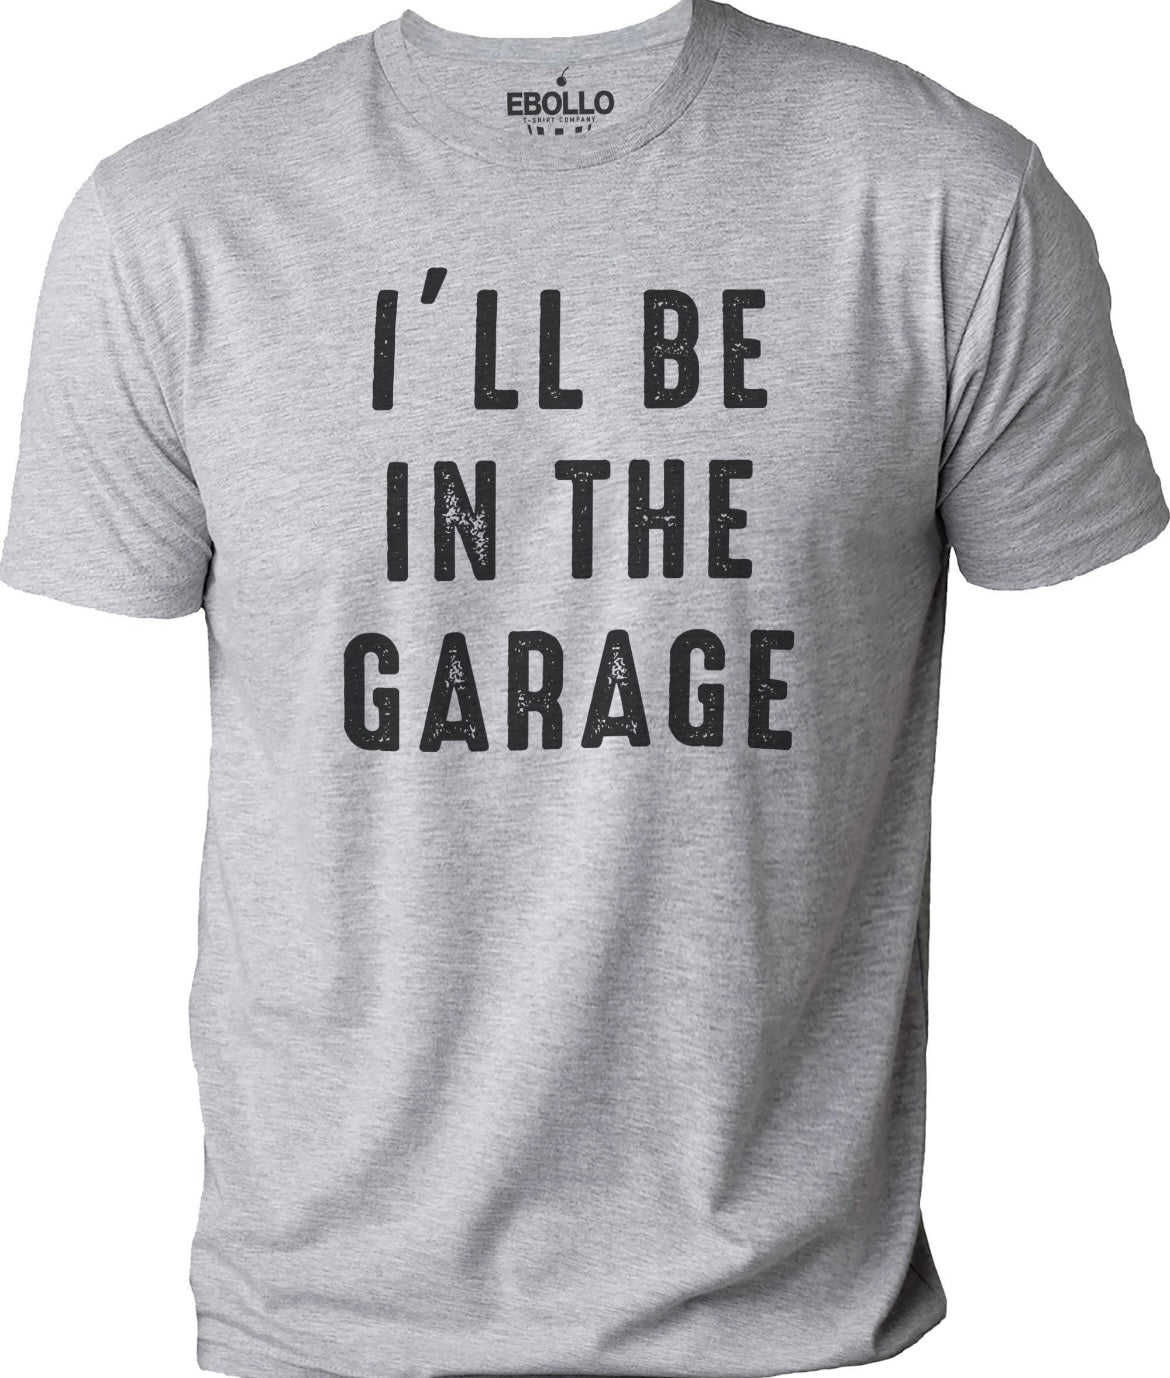 I'll Be in the Garage